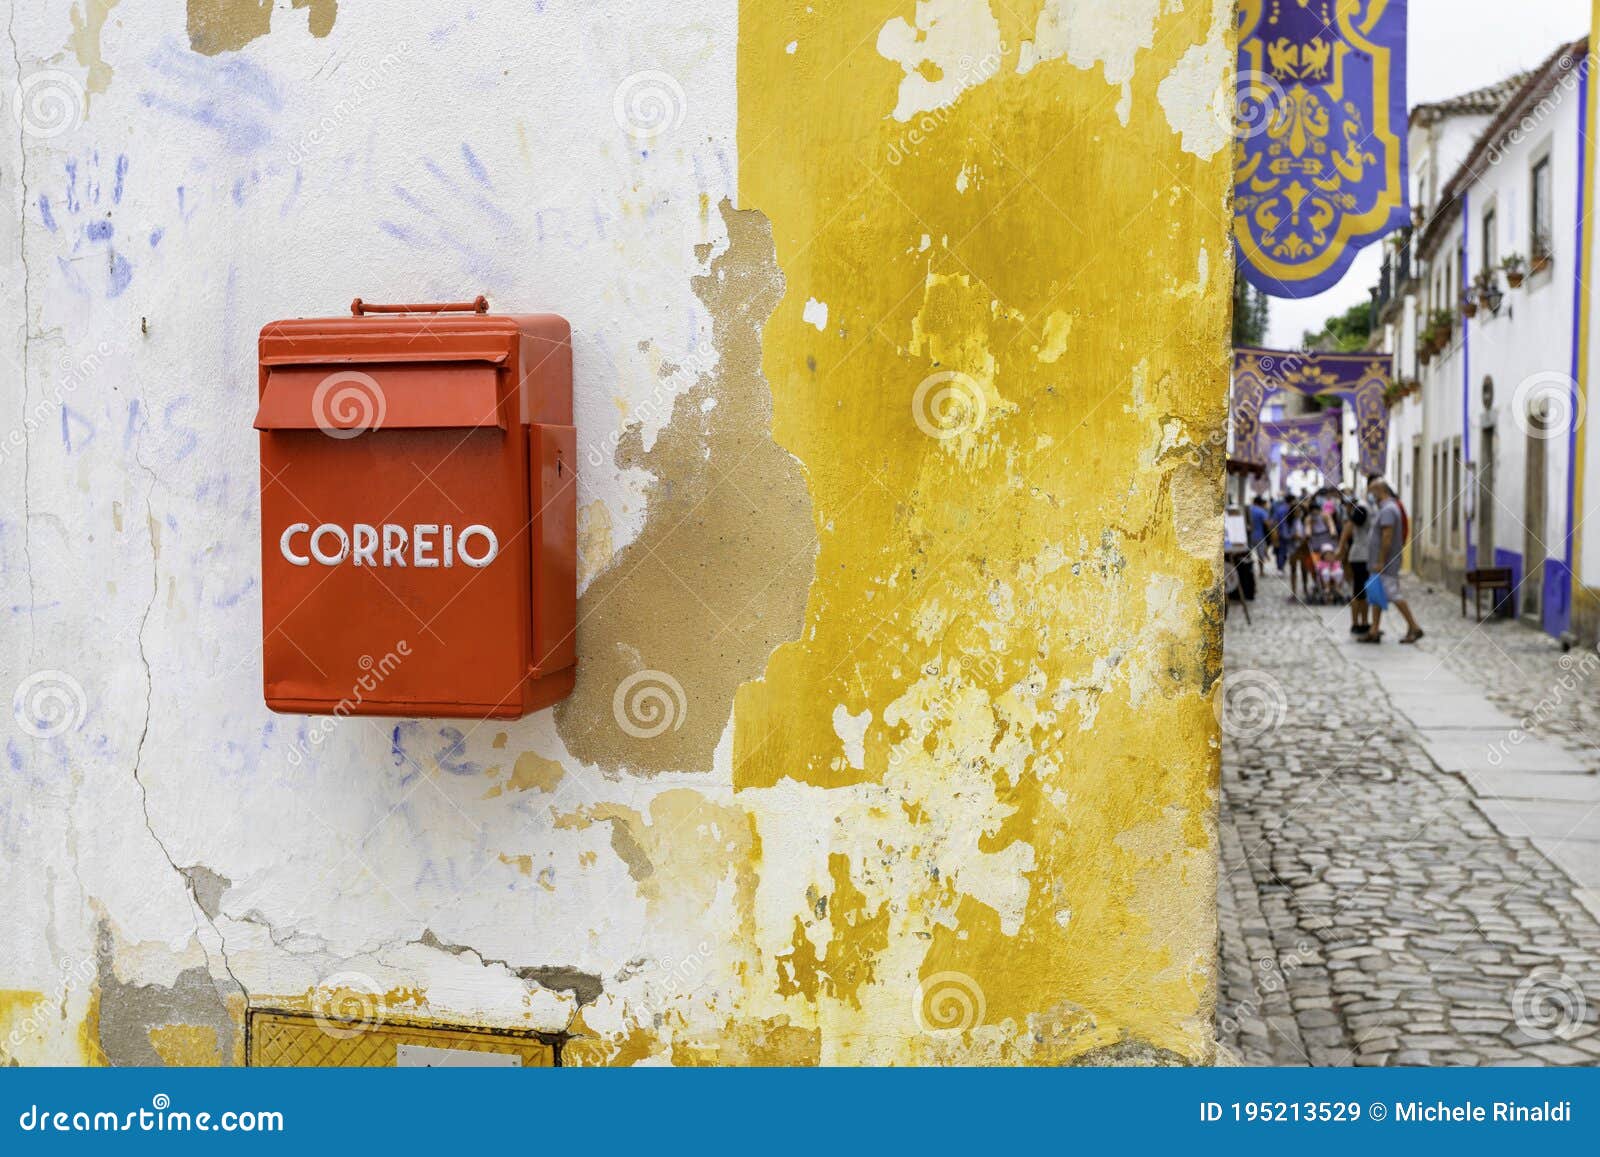 characteristic correio box in english: mail box in a little village in portugal. red mail box against a white and yellow